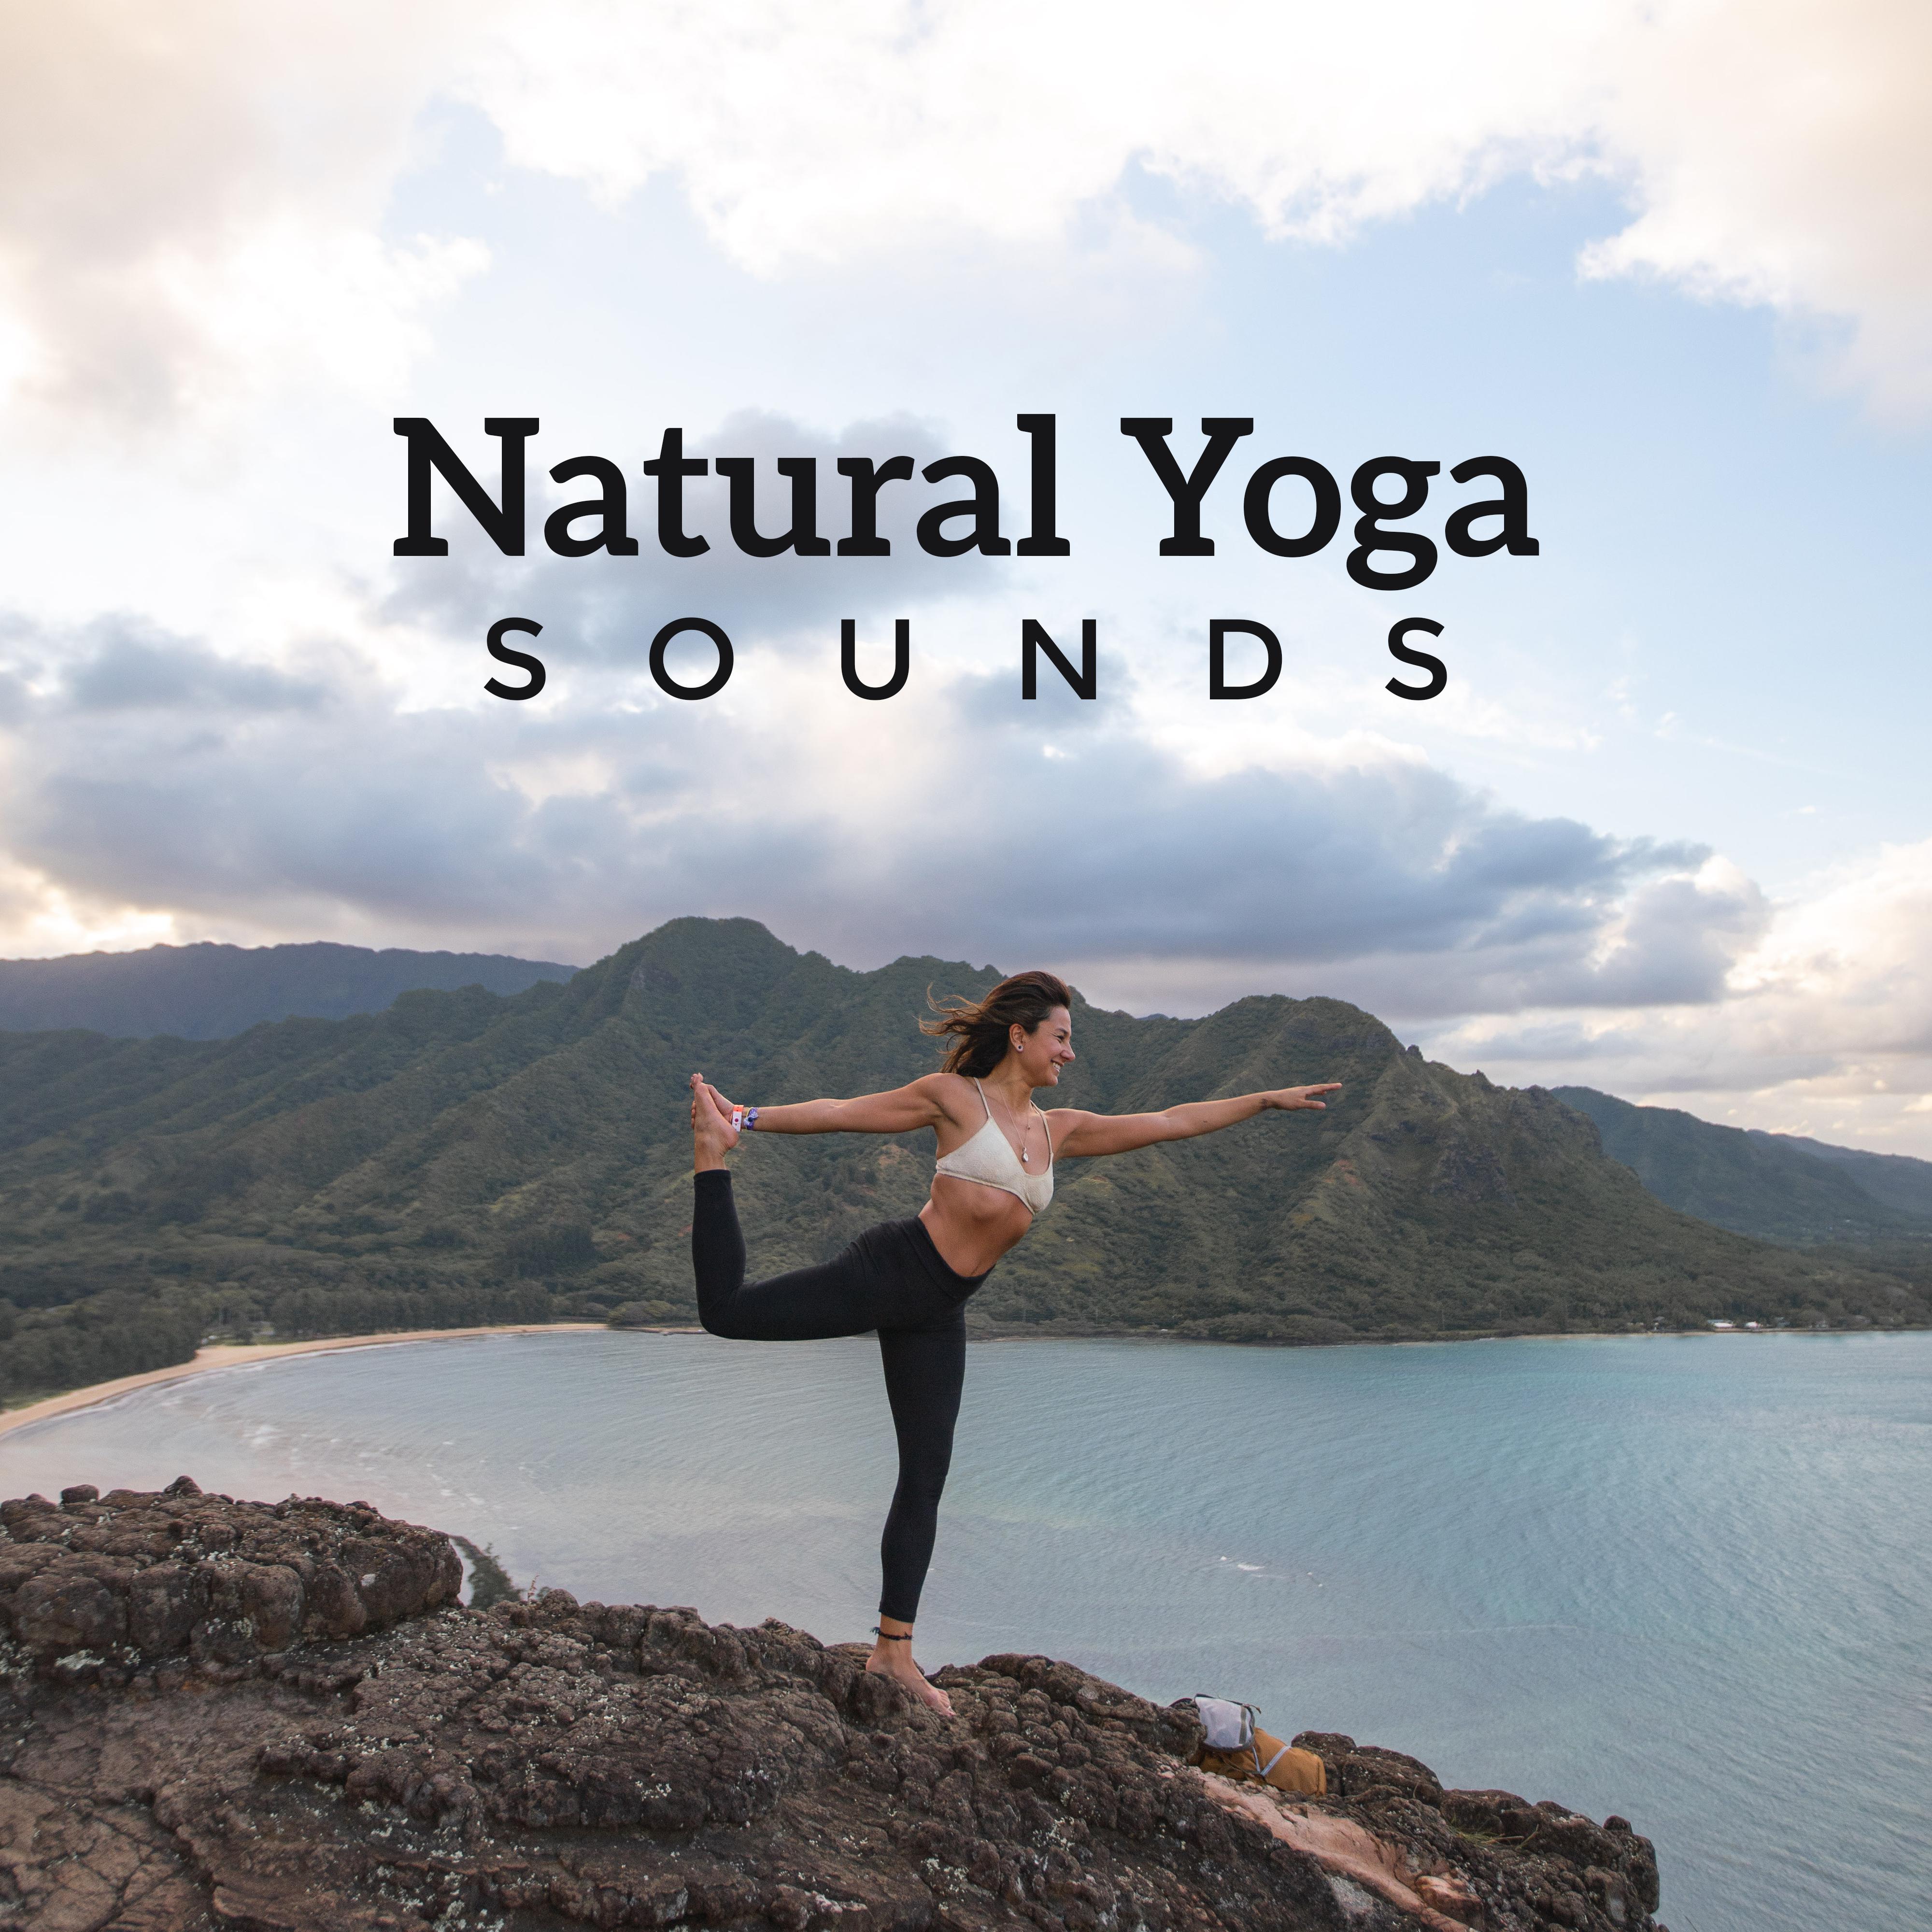 Natural Yoga Sounds: New Age Fresh 2019 Music Compilation, Songs with Nature Sounds of Birds, Forest, Water, Perfect Relaxation & Meditation Background